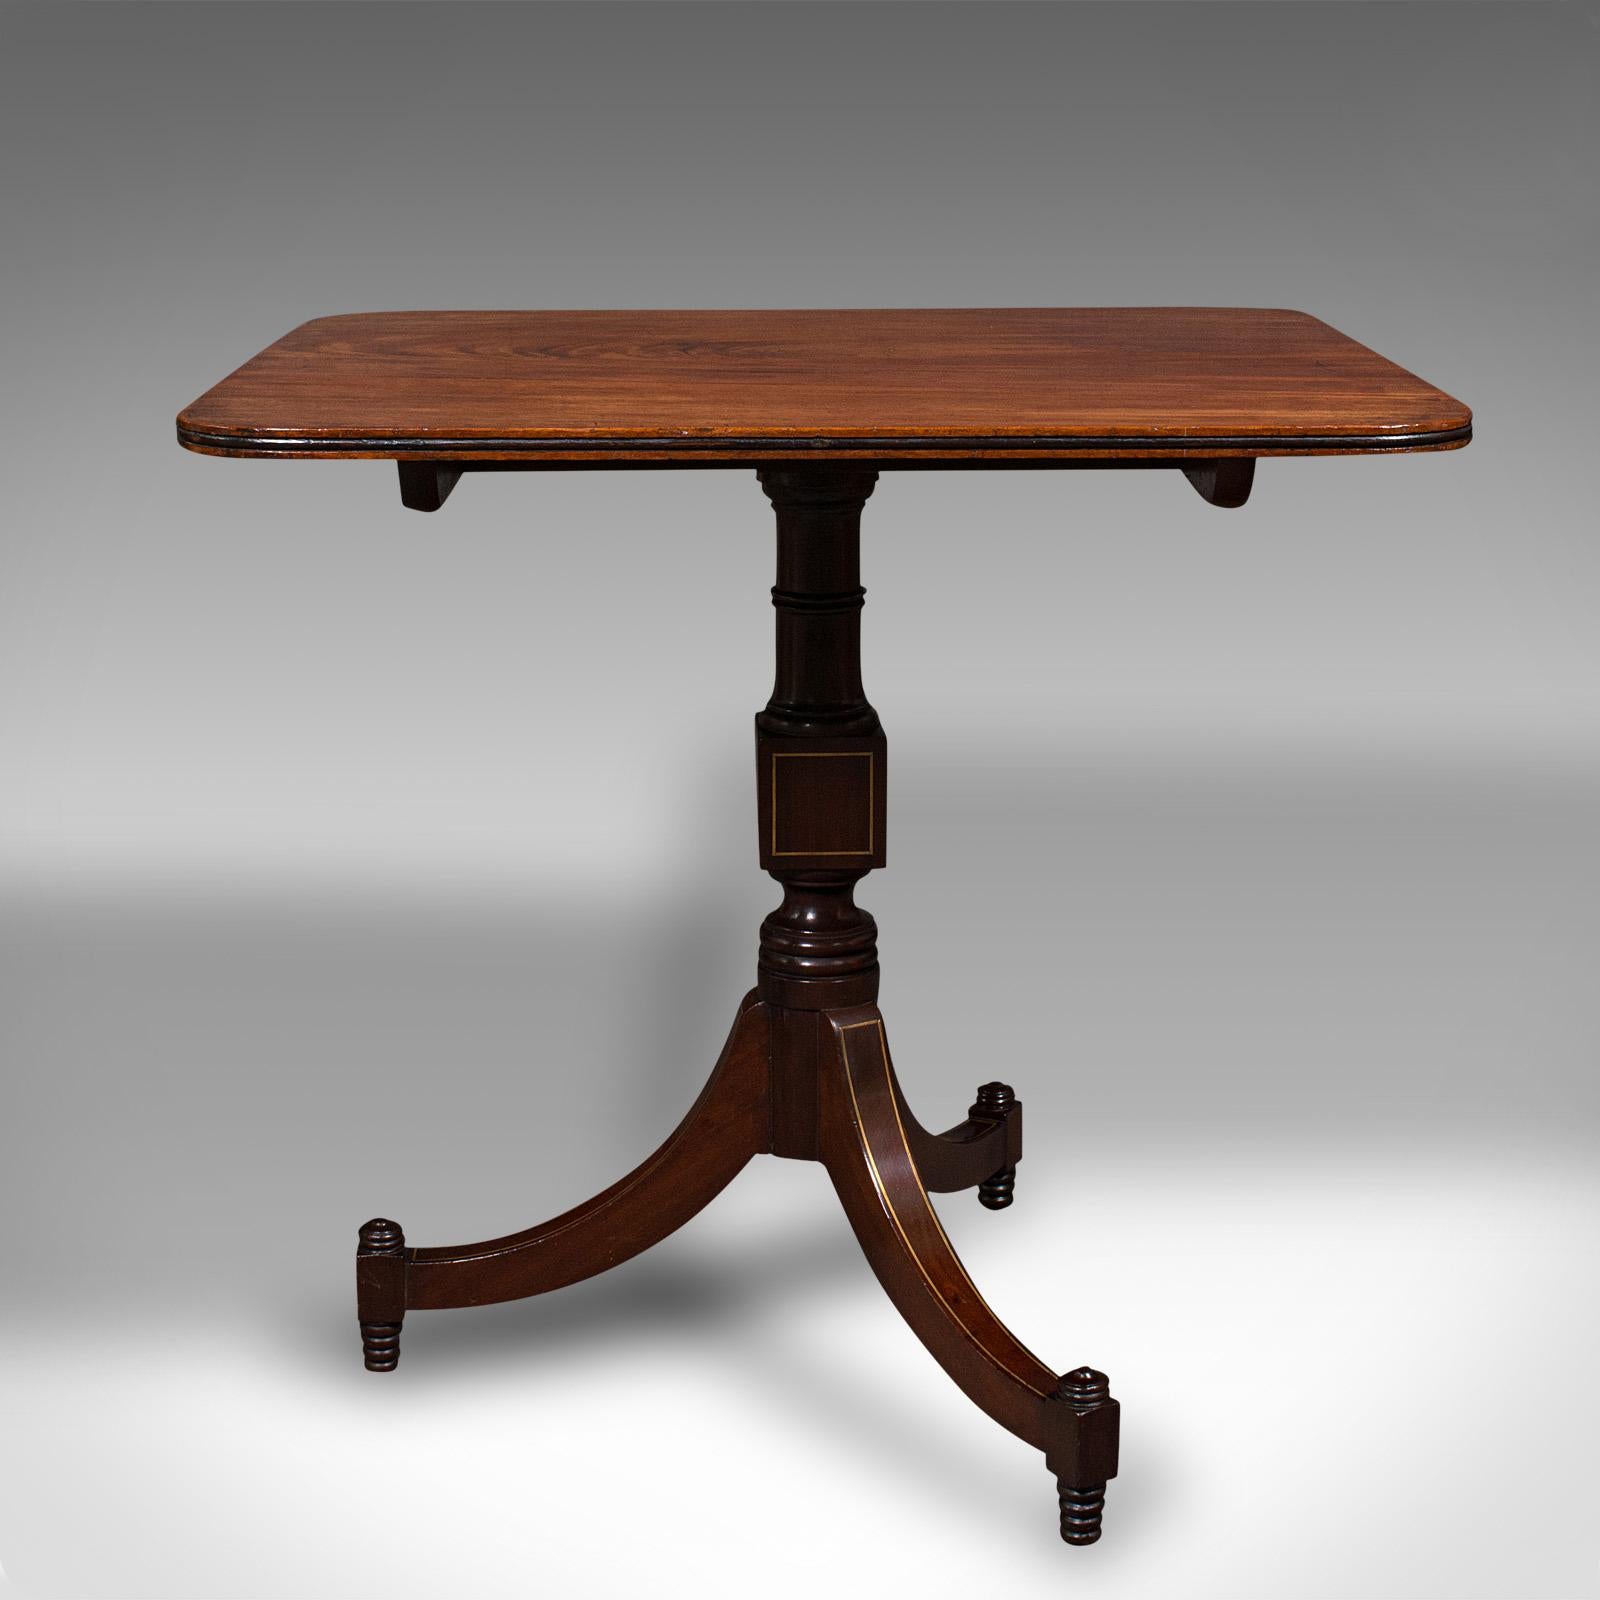 Antique Occasional Table, English, Tilt Top, Lamp, Wine, Empire Taste, Regency In Good Condition For Sale In Hele, Devon, GB